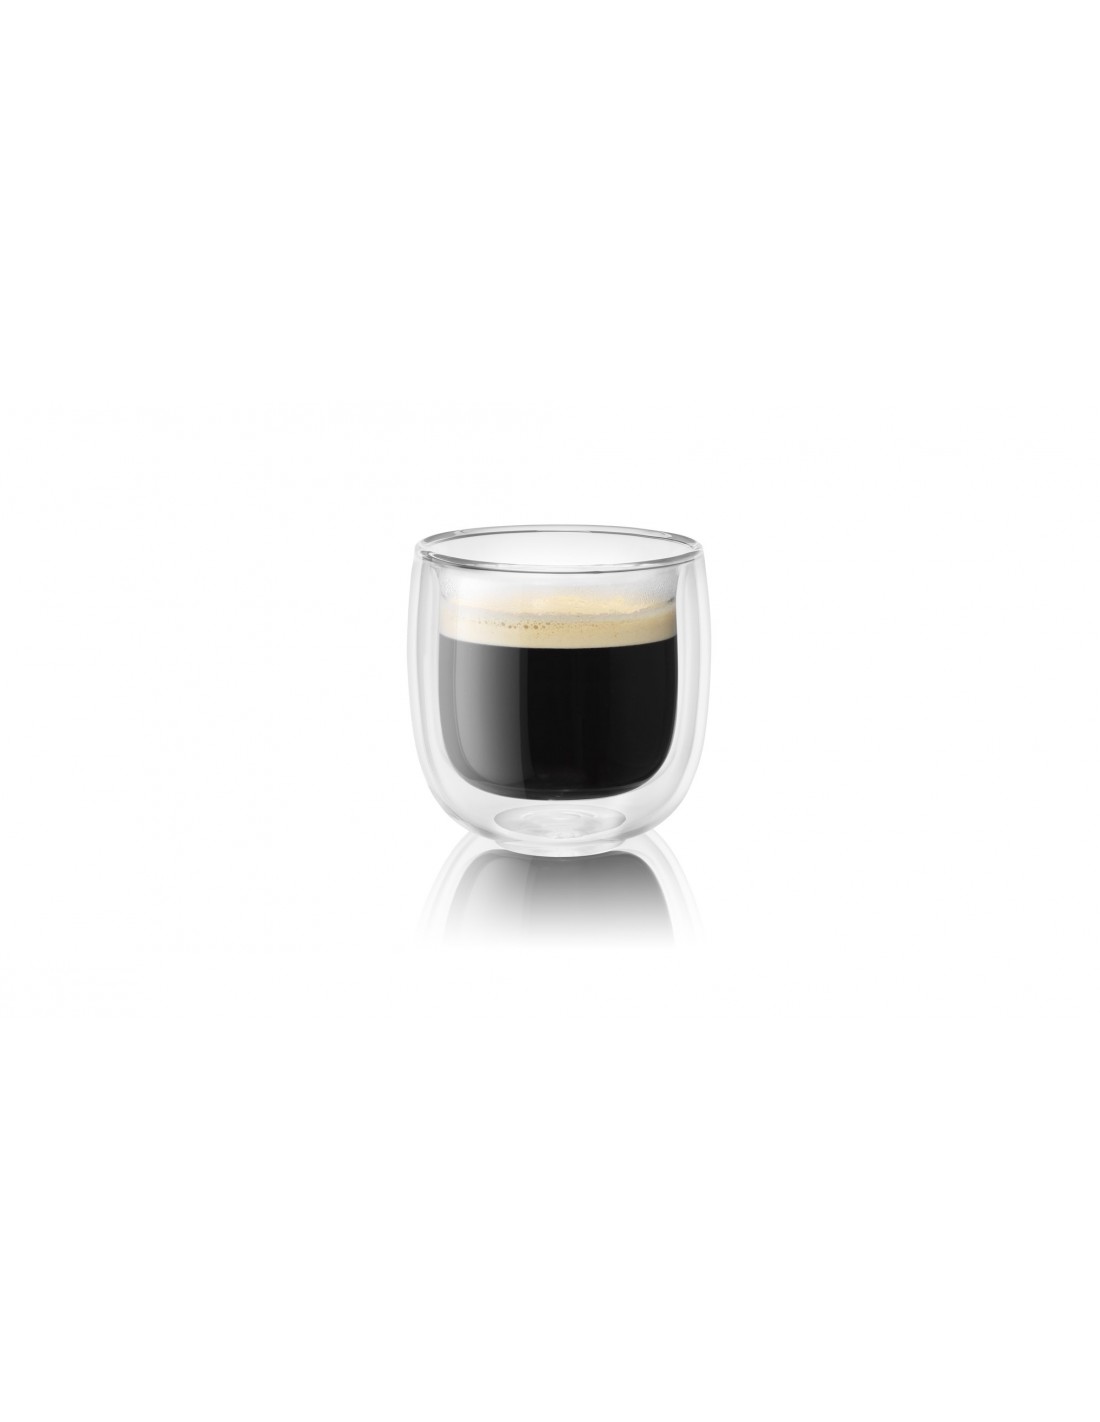 https://www.mimocook.com/29298-thickbox_default/set-of-2-double-walled-espresso-glasses-80-ml-zwilling-sorrento.jpg